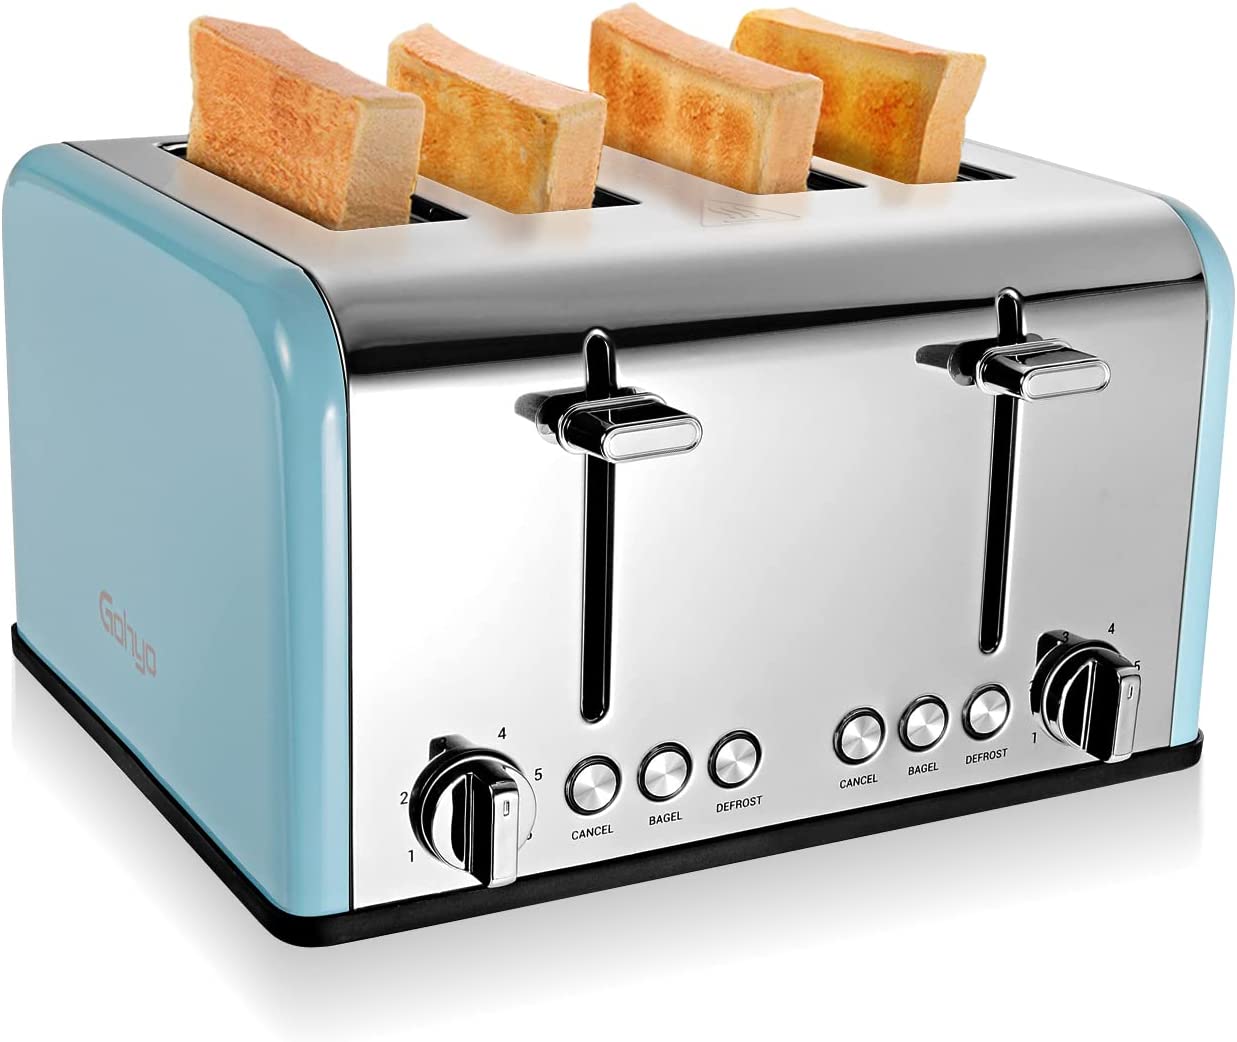 4 Slice Toaster 100% Stainless Steel with Wide Slots & Removable Crumb Tray $19.98